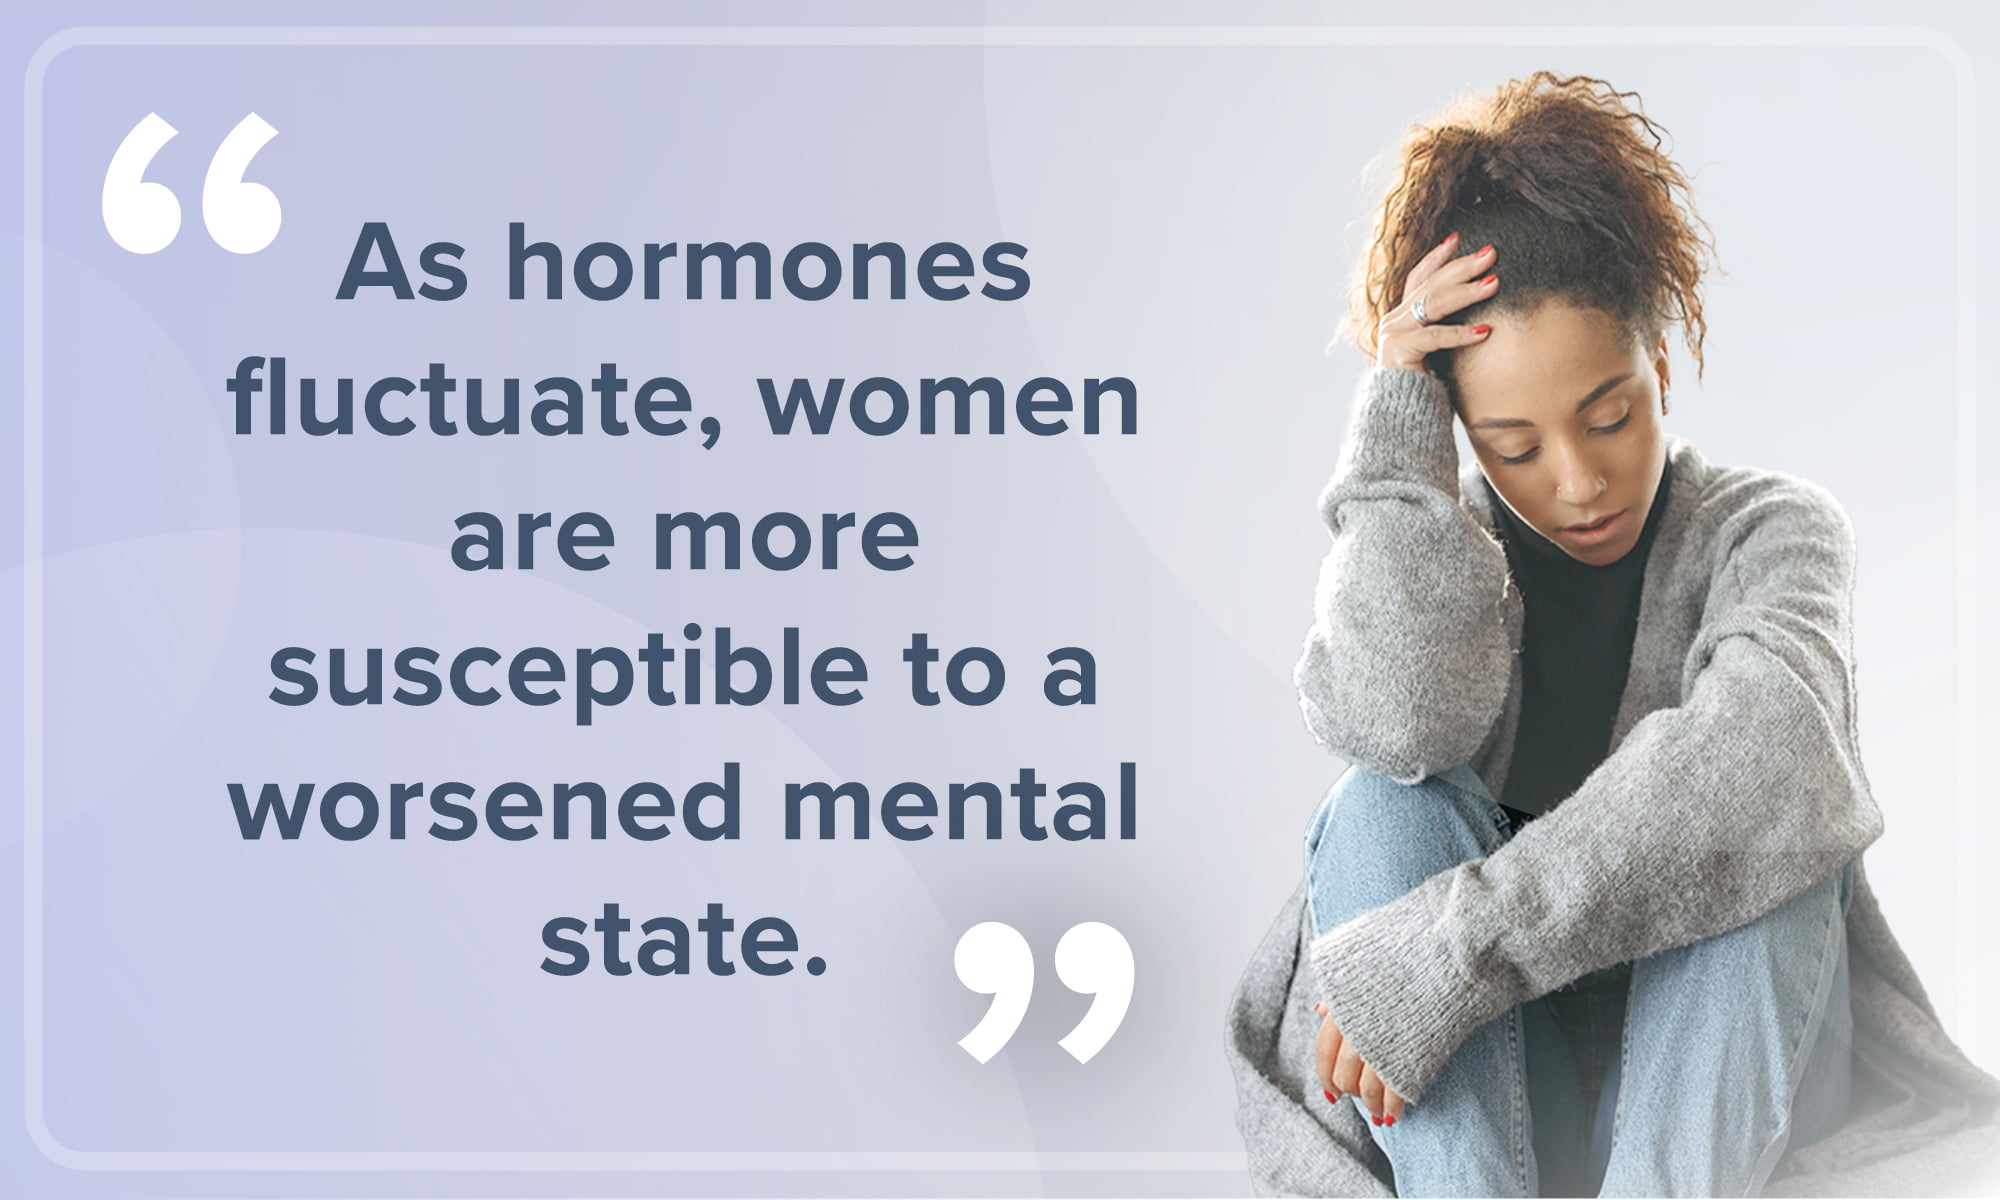 An image portraying a concerned woman, accompanied by the quote: "As hormones fluctuate, women are more susceptible to a worsened mental state."